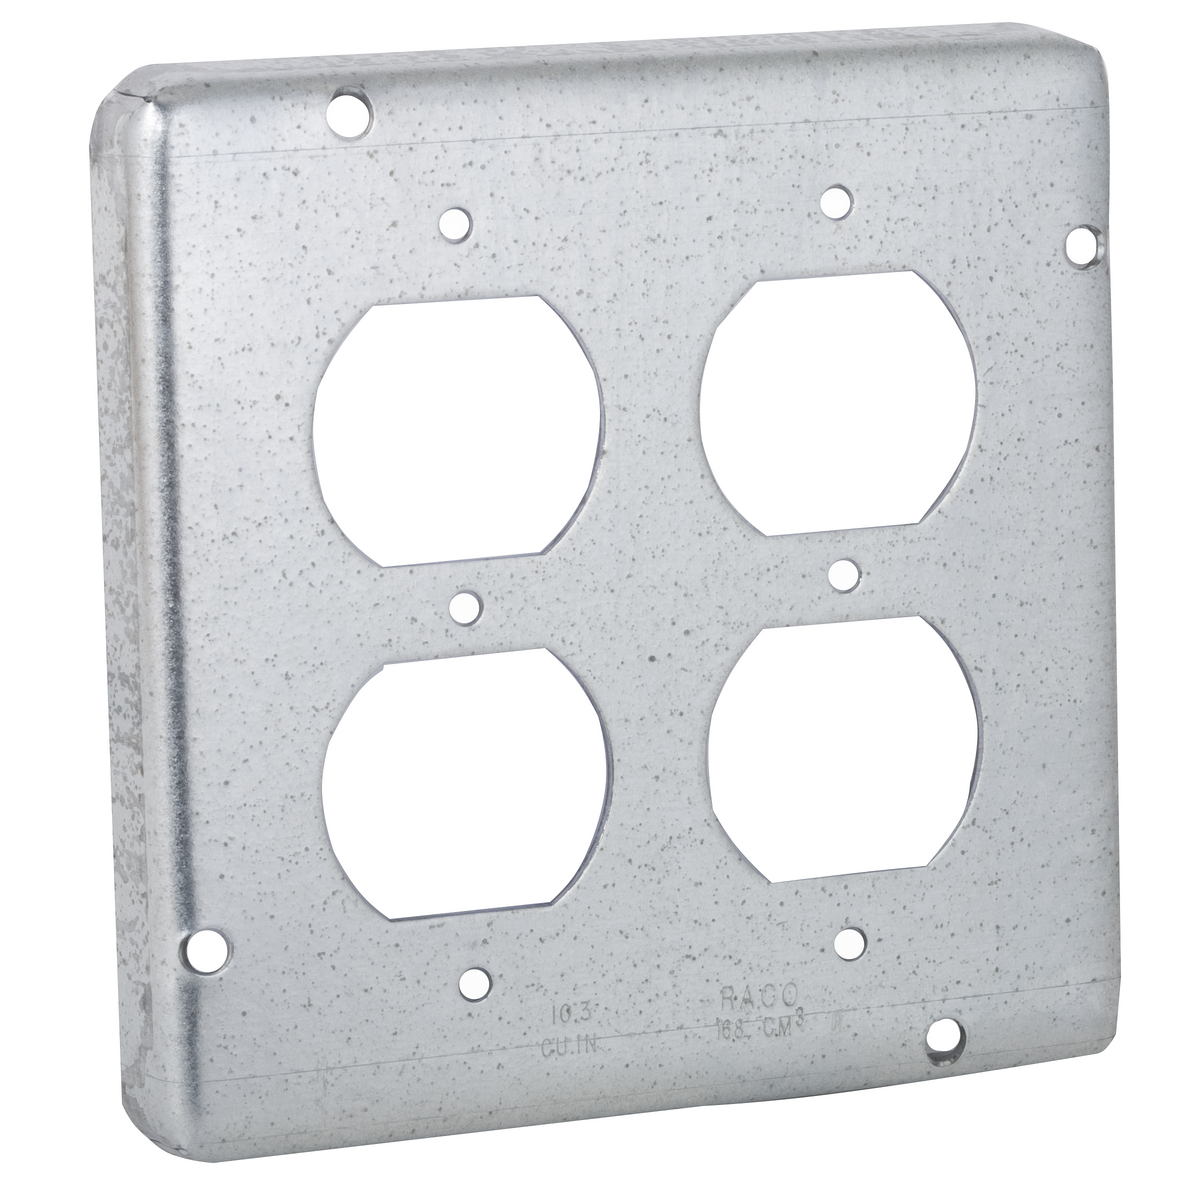 Raco/Hubbell   4 11/16"  Raised Square Cover #979 for 2 Duplex Receptacles 